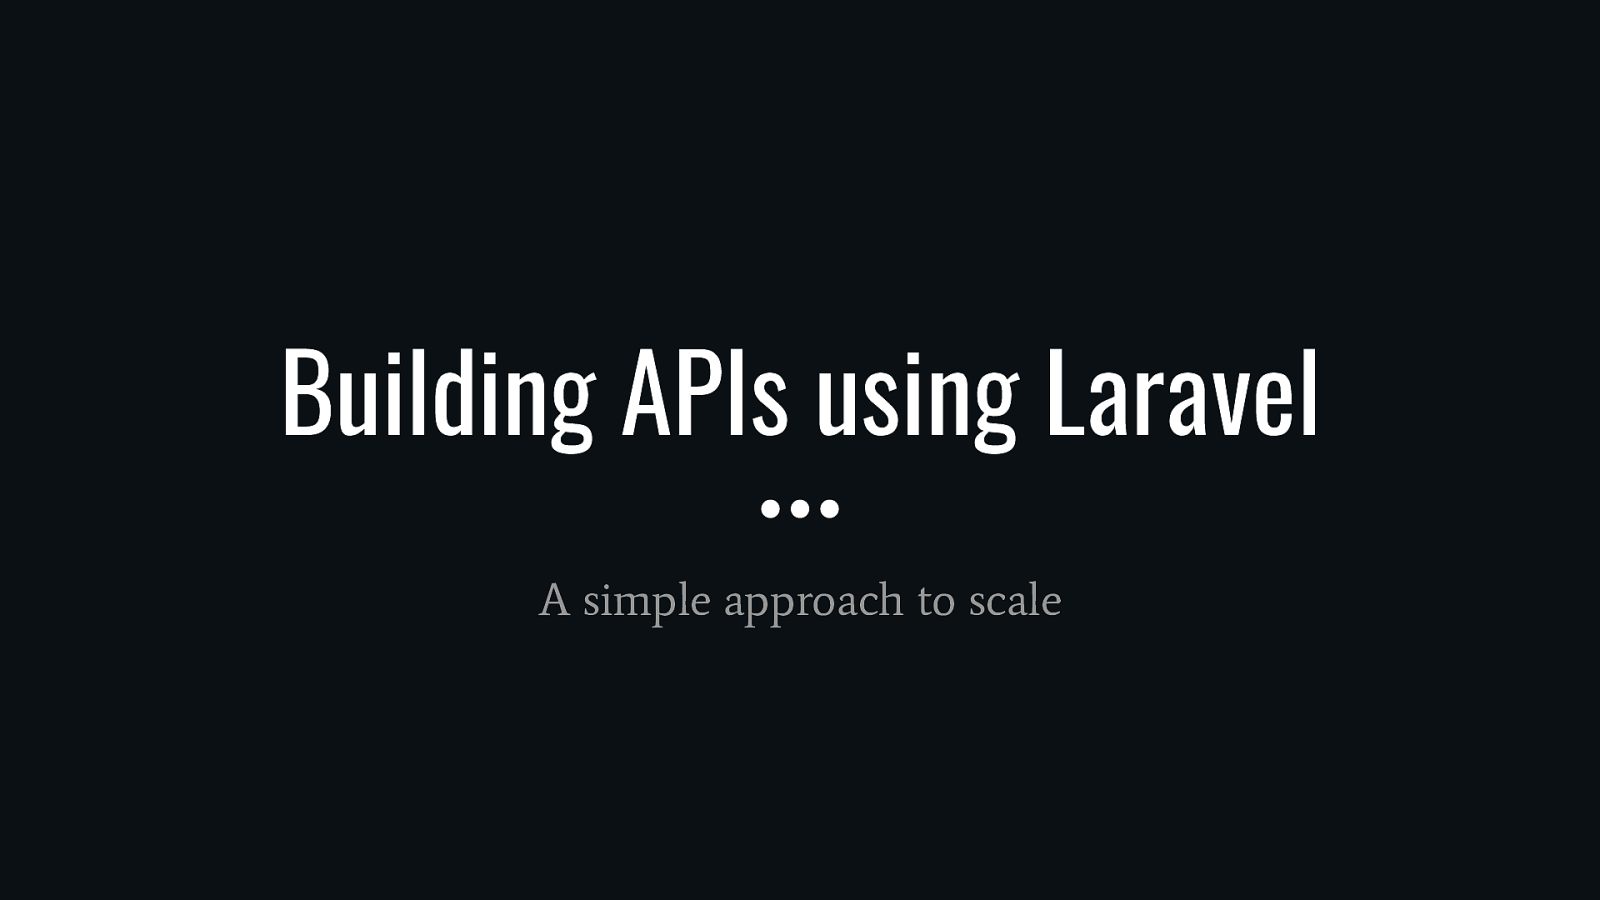 Building APIs using Laravel - A simple approach to scale